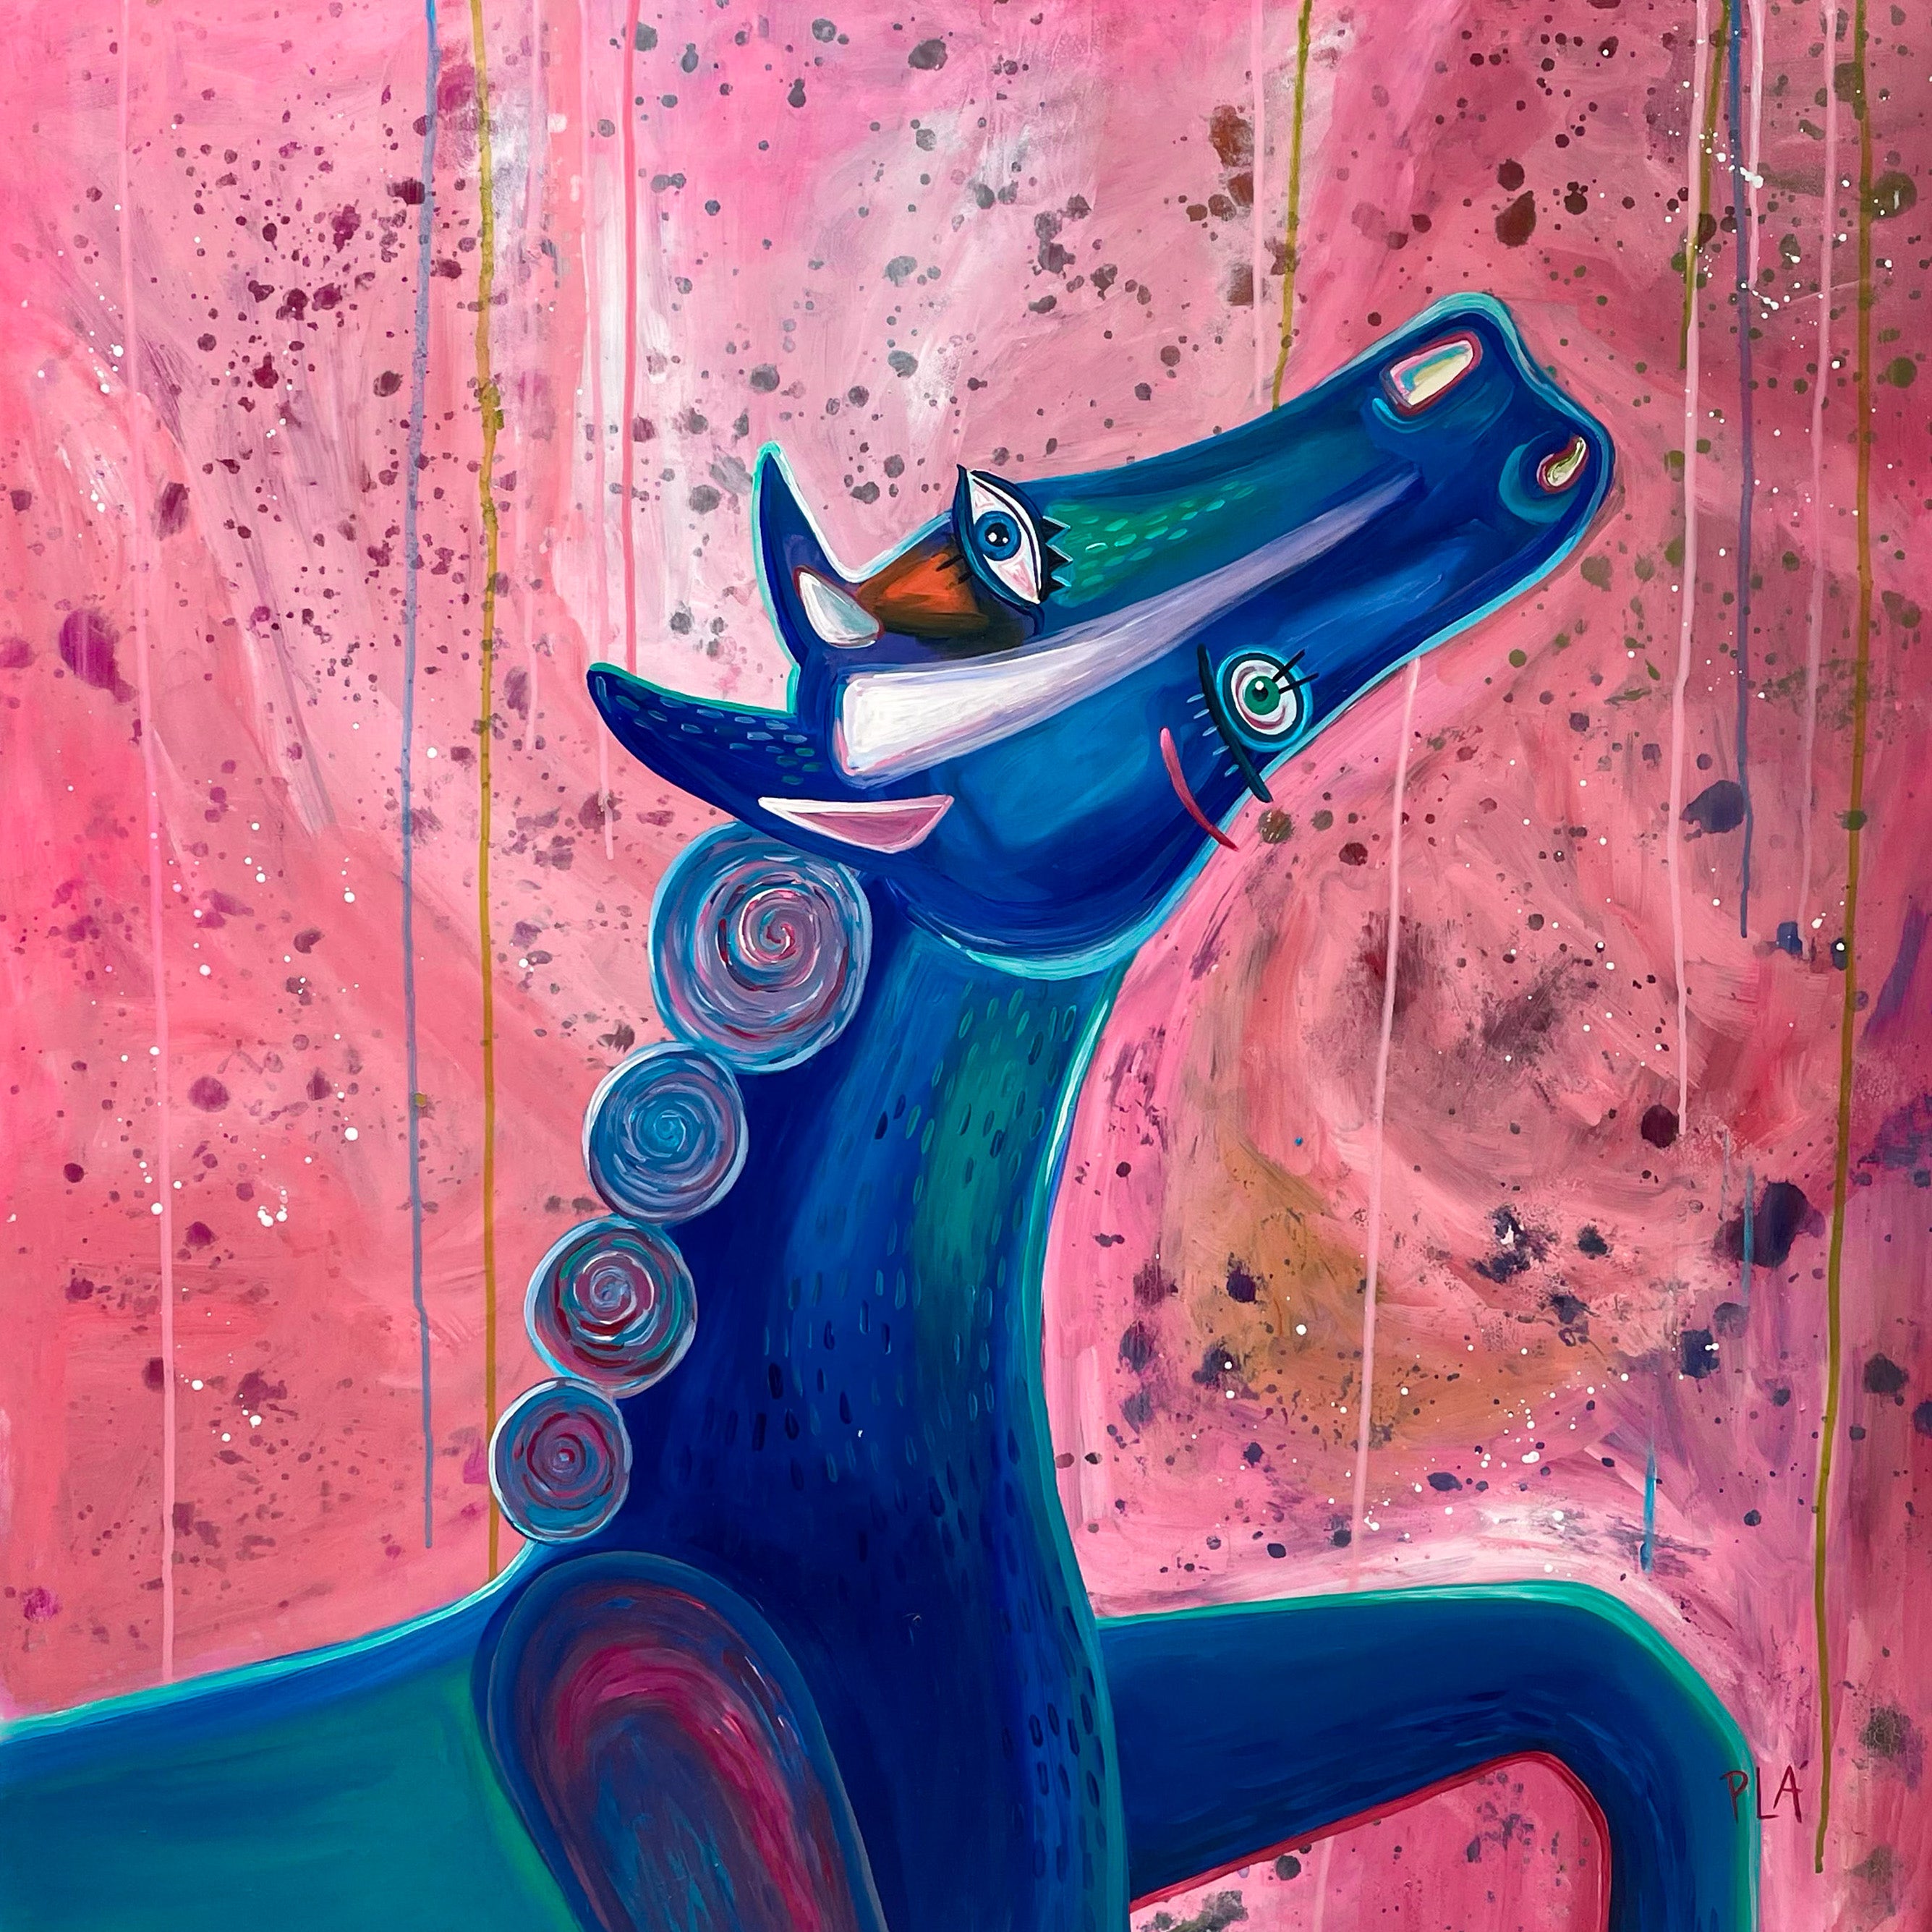 "PINK PICASSO STUD HORSE" PAINTING ON CANVAS